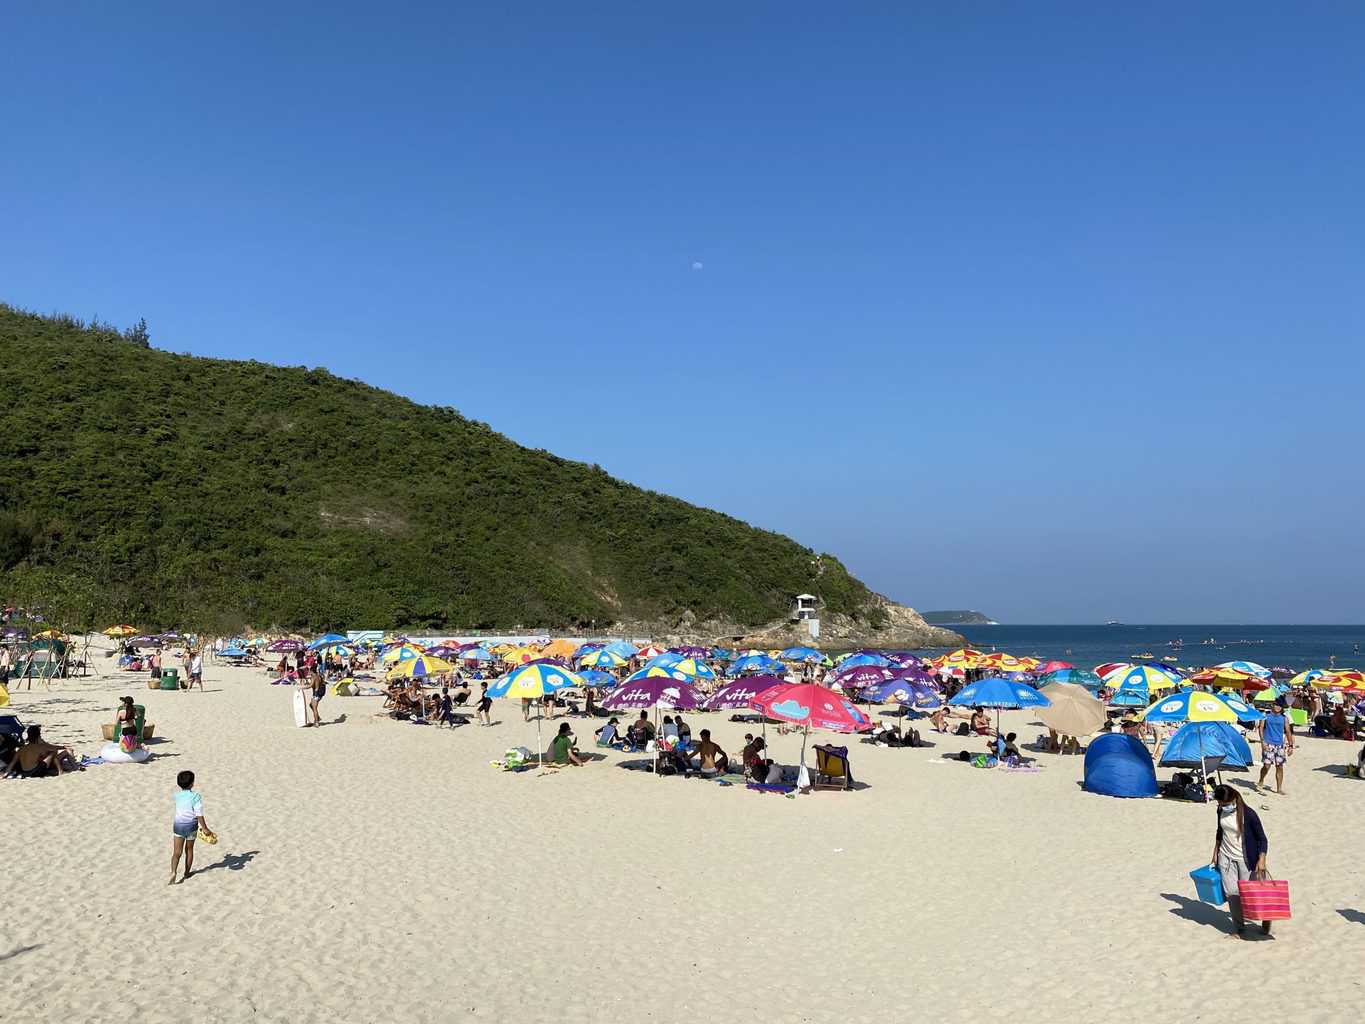 Big Wave Bay Beach gets crowded on weekends and holidays